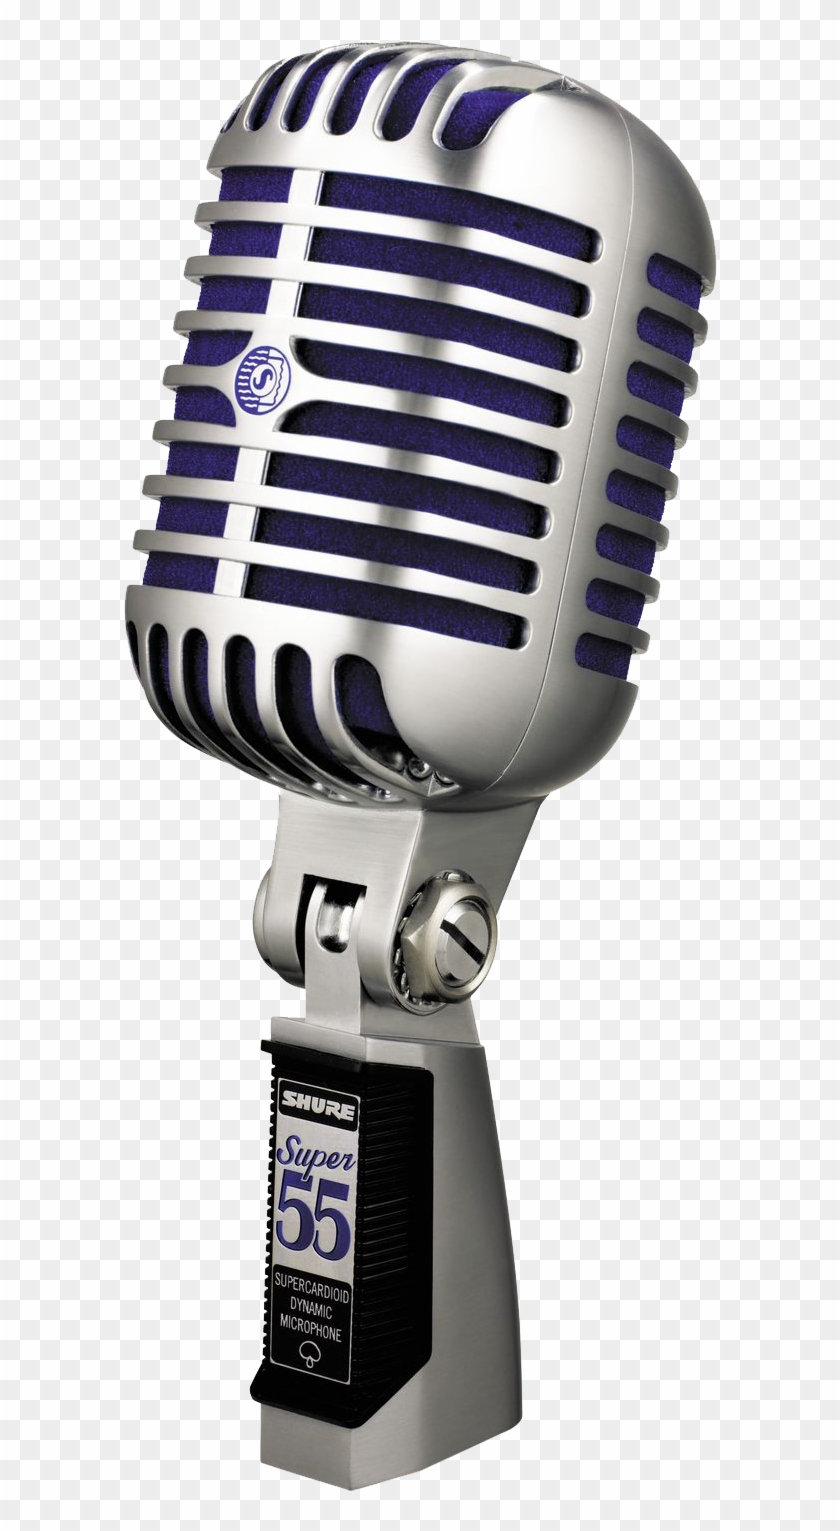 Mic Png Free Download - Shure Super 55 Deluxe Classic Style Vocal Microphone #900351